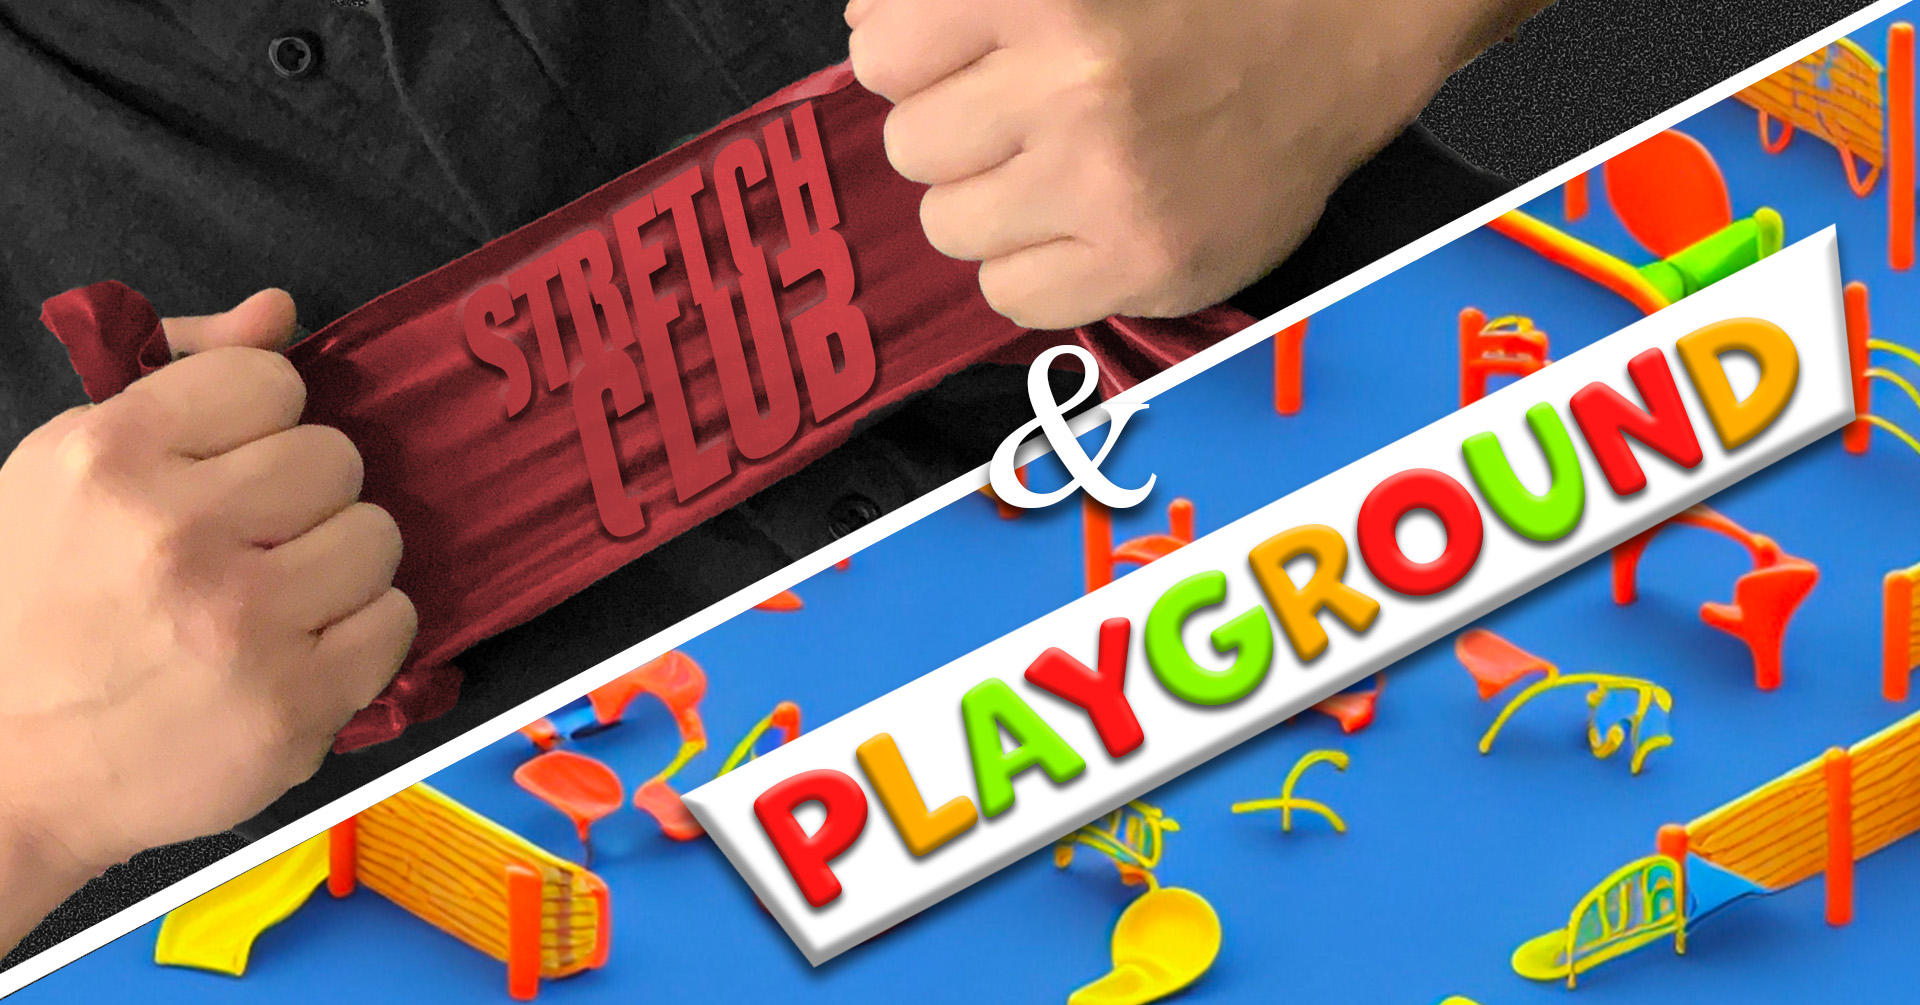 Two images are diagonally separated by a white line. The first image is of someone pulling a large rubber band with the words Stretch Club on it. The second image is the word Playground in colourful, playful typeface upon a background of colourful AI generated playground parts.